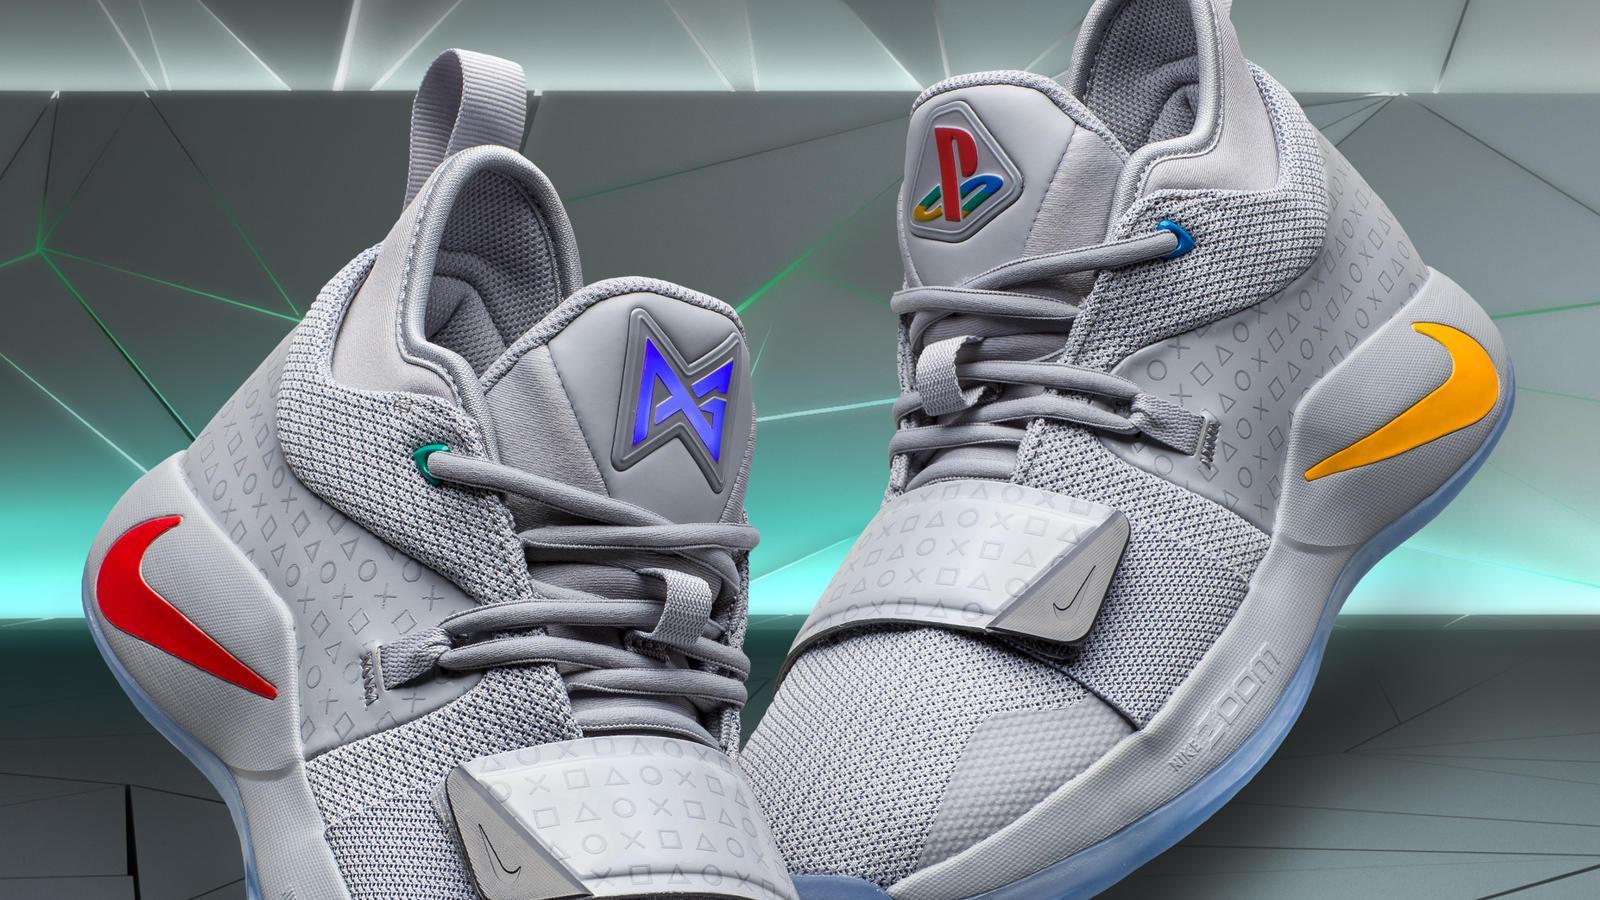 Nike reveals PLAYSTATION shoe inspired by classic 1994 console